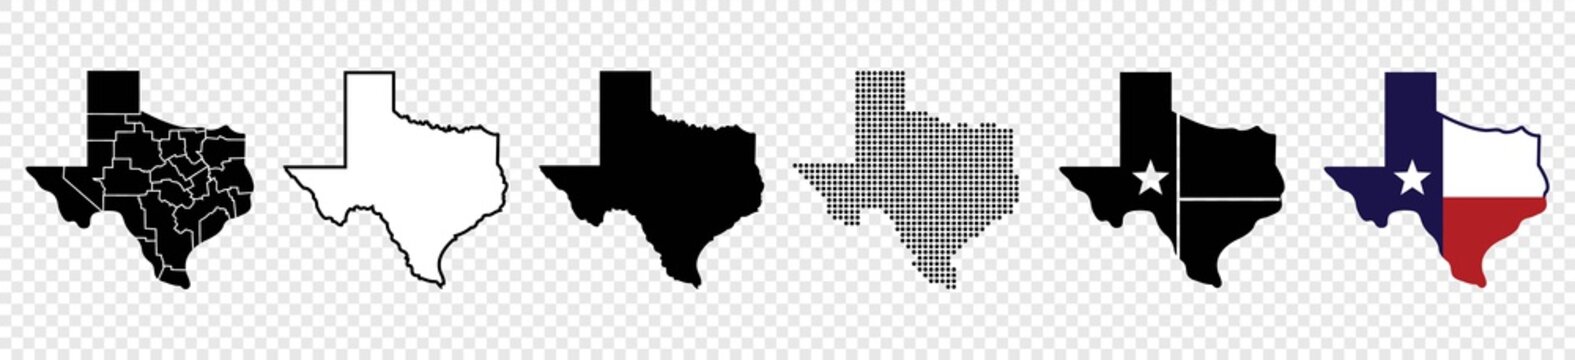 Texas map icon set, Texas map isolated on transparent background, vector illustration